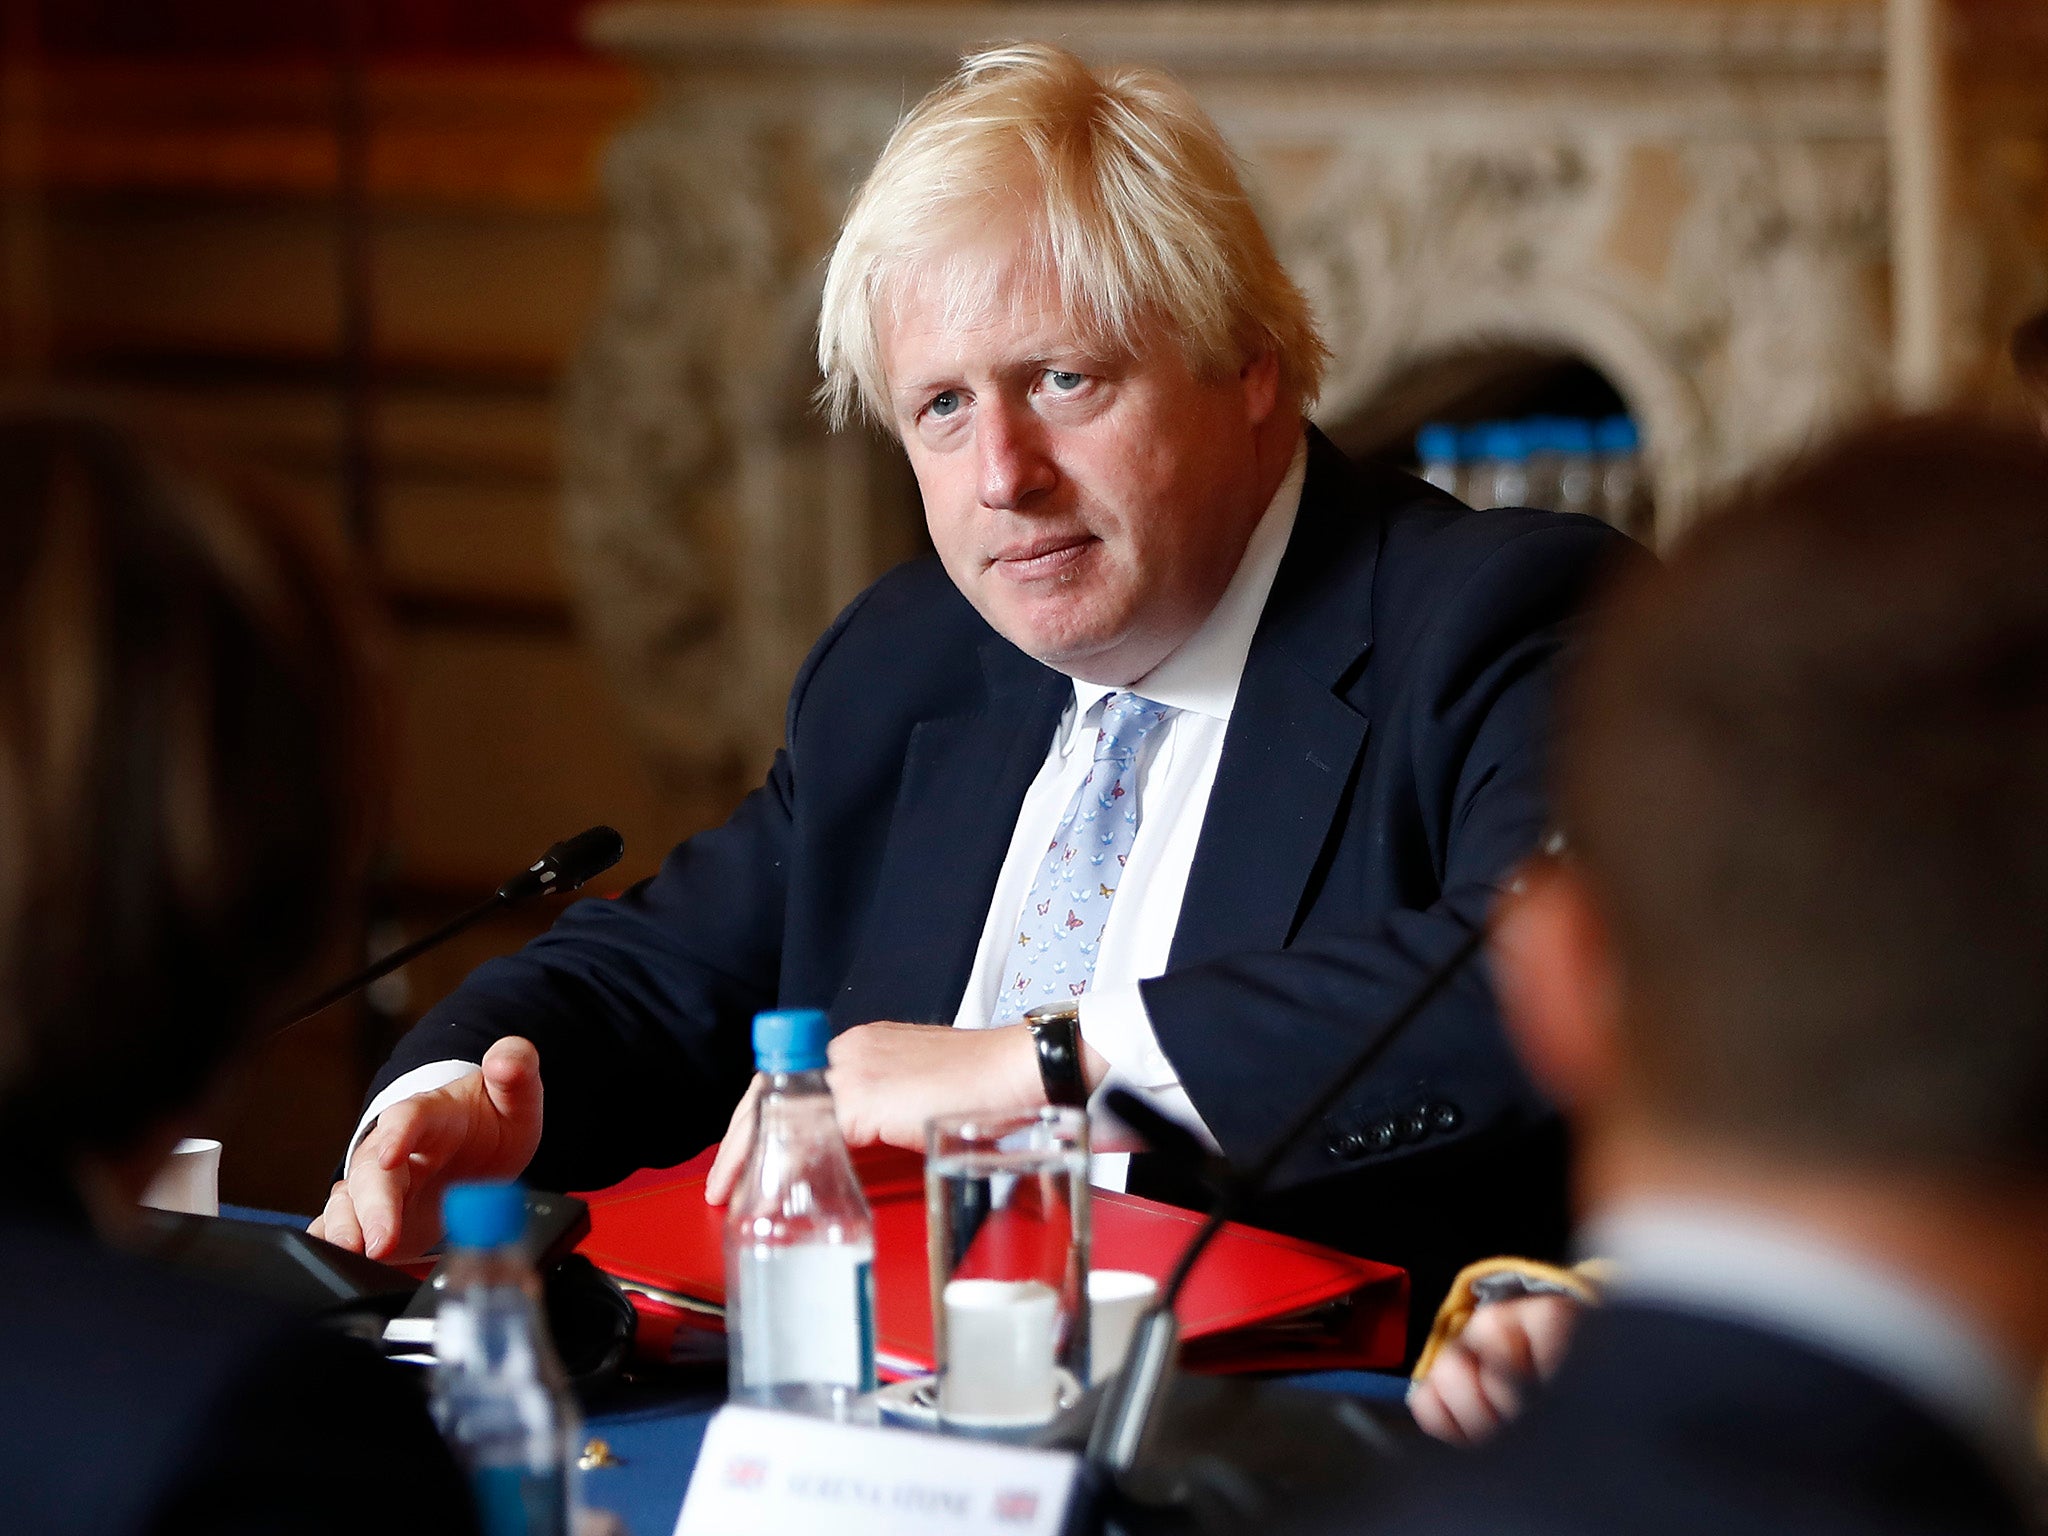 Johnson’s gaffes on foreign soil have unquestionably dented the reputation of both May and her government abroad